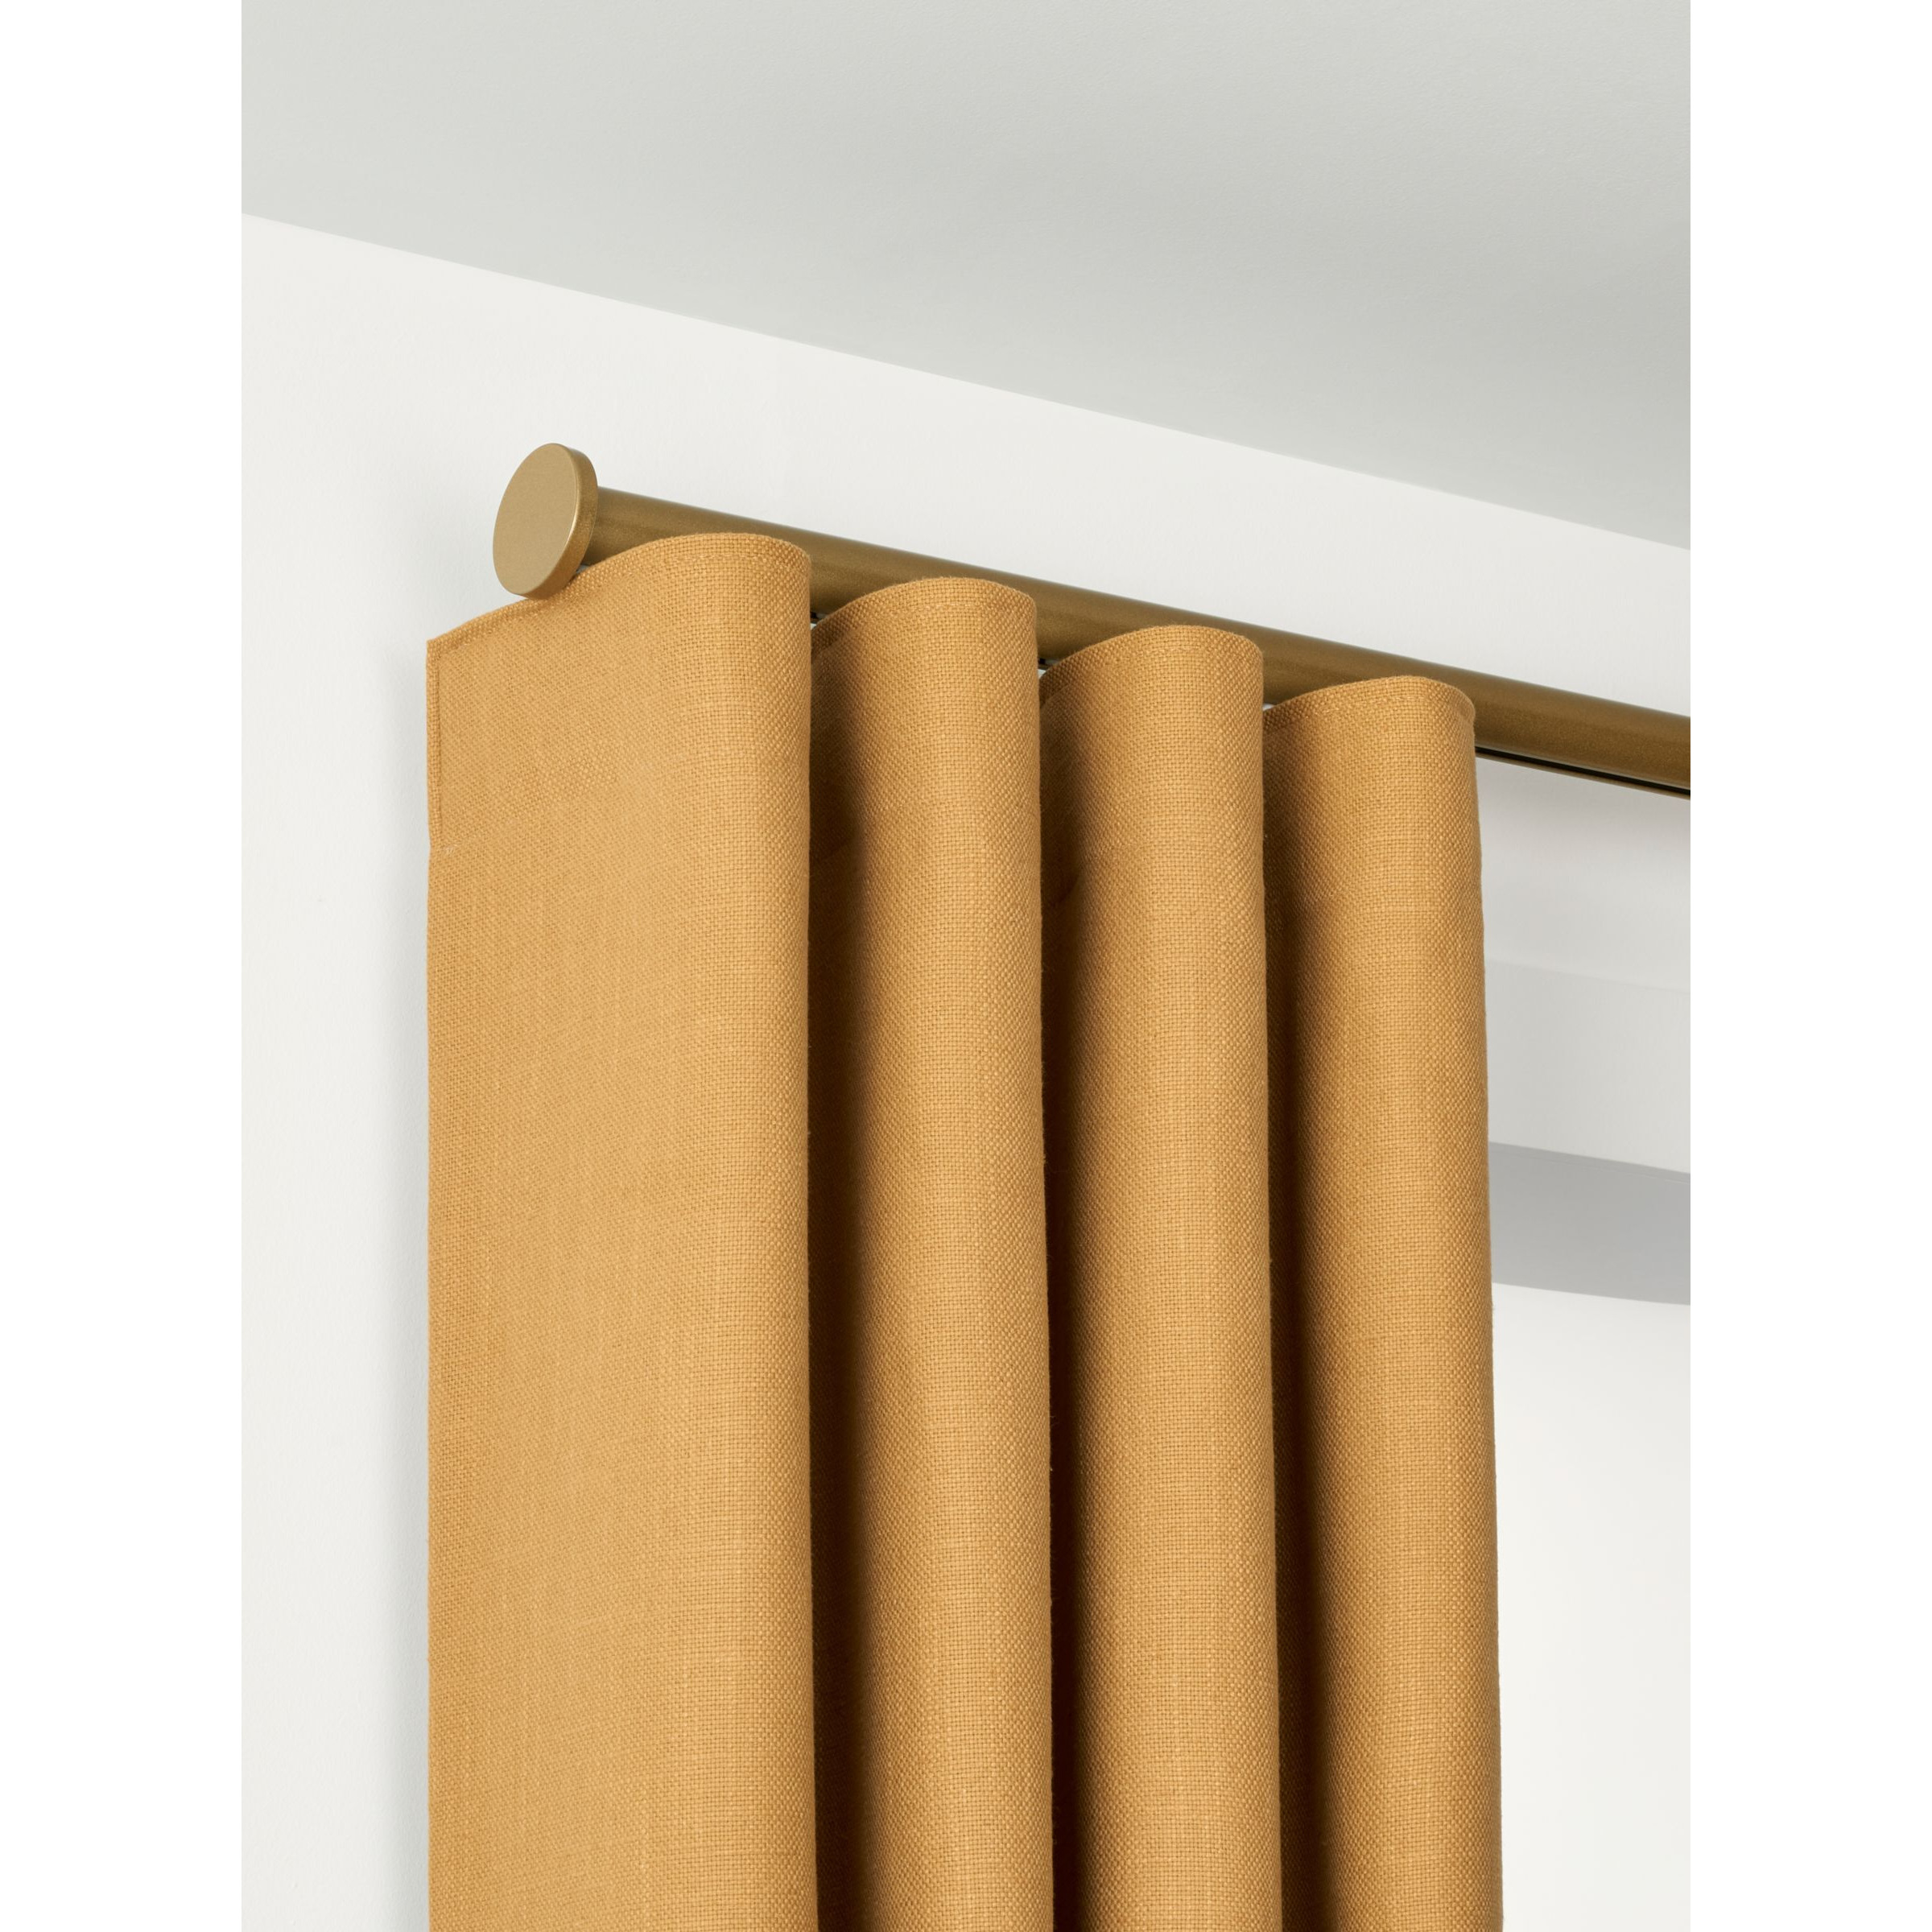 John Lewis Select Curl Gliding Curtain Pole with Disc Finial, Wall Fix, Dia.30mm - image 1